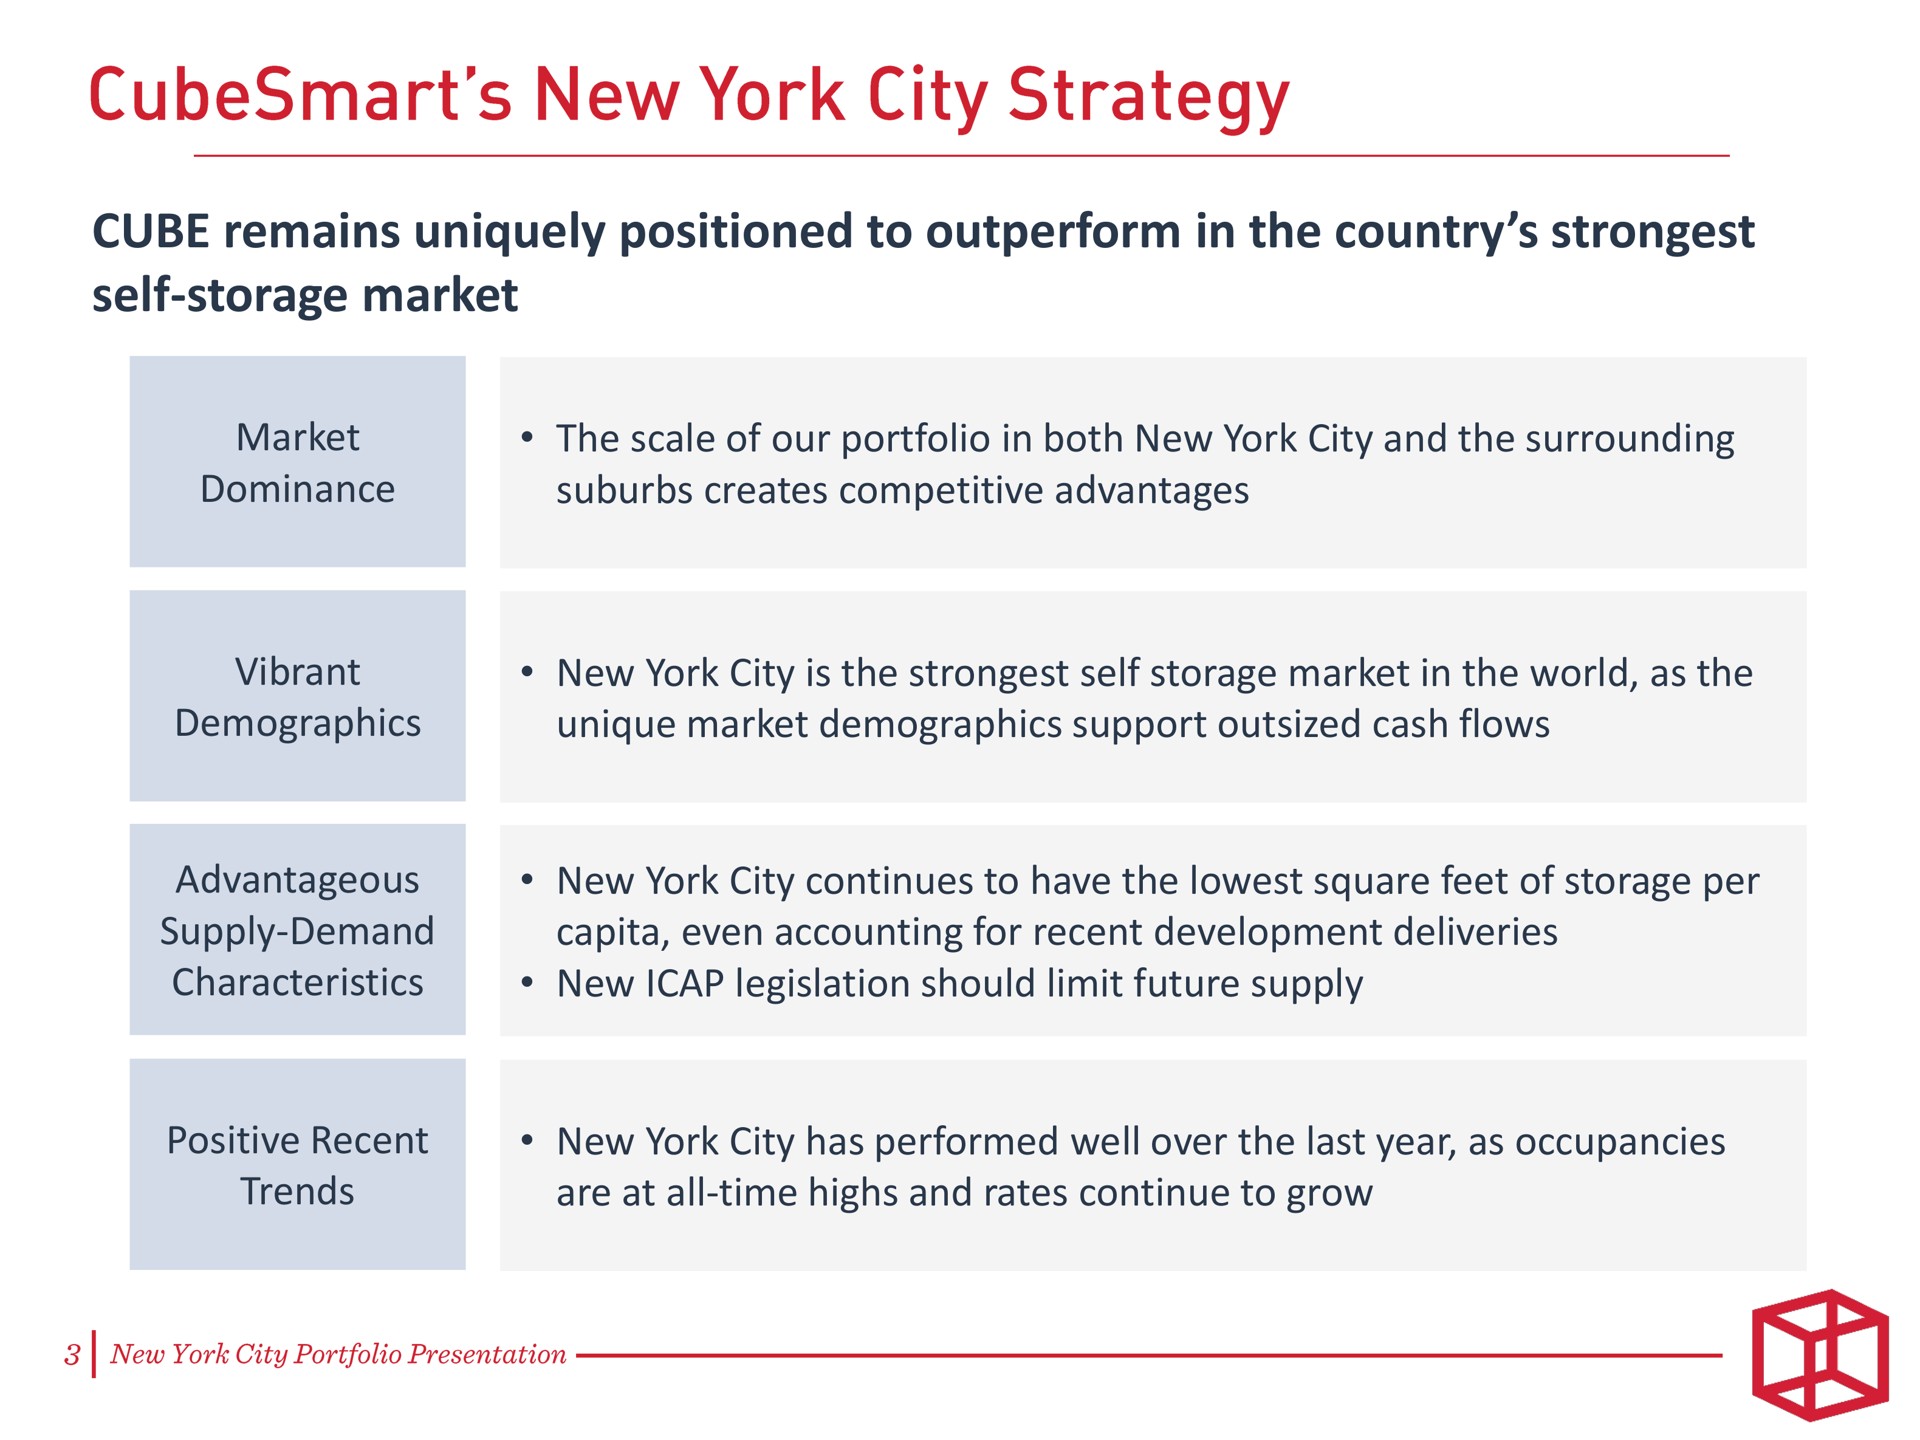 cube remains uniquely positioned to outperform in the country self storage market new york city strategy | CubeSmart